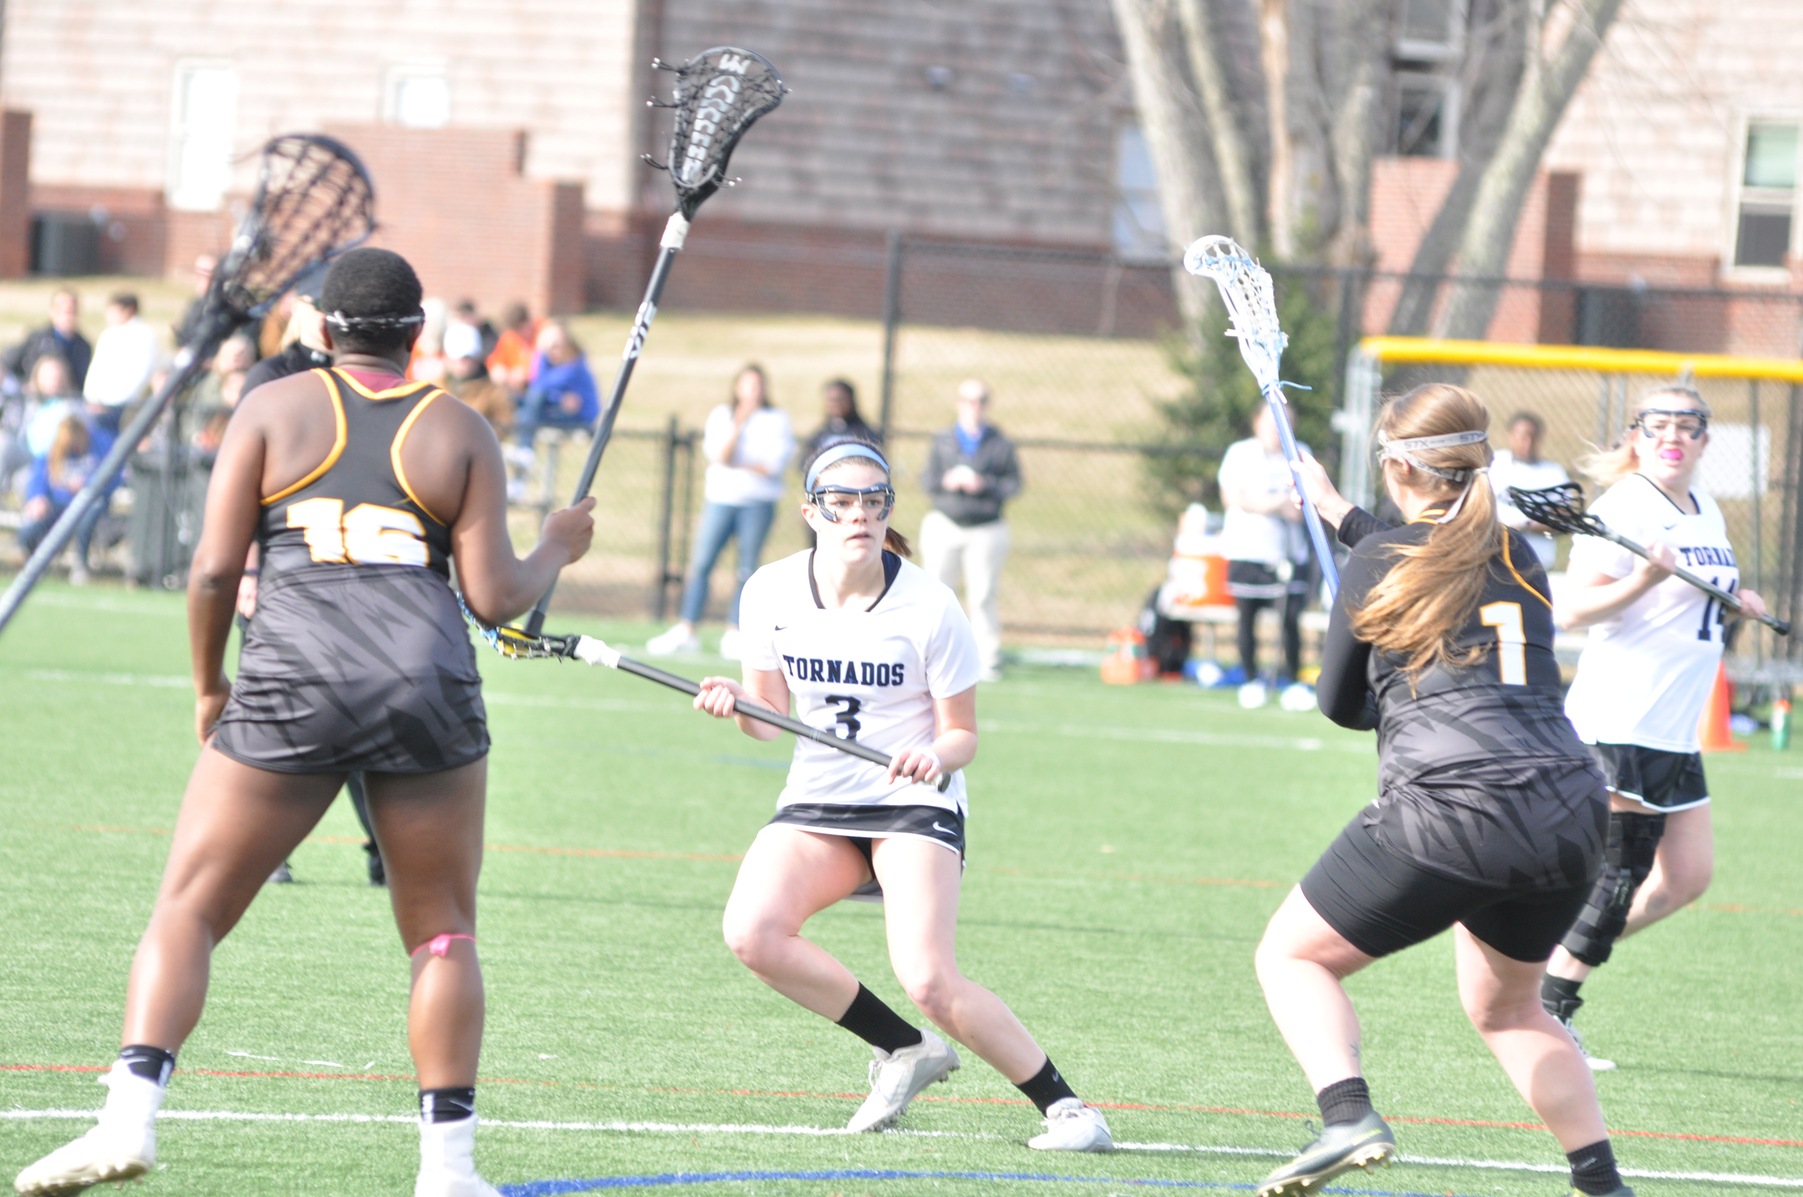 Brevard Women’s Lacrosse Improves to 3-0 With Gritty 6-4 Win Over Randolph